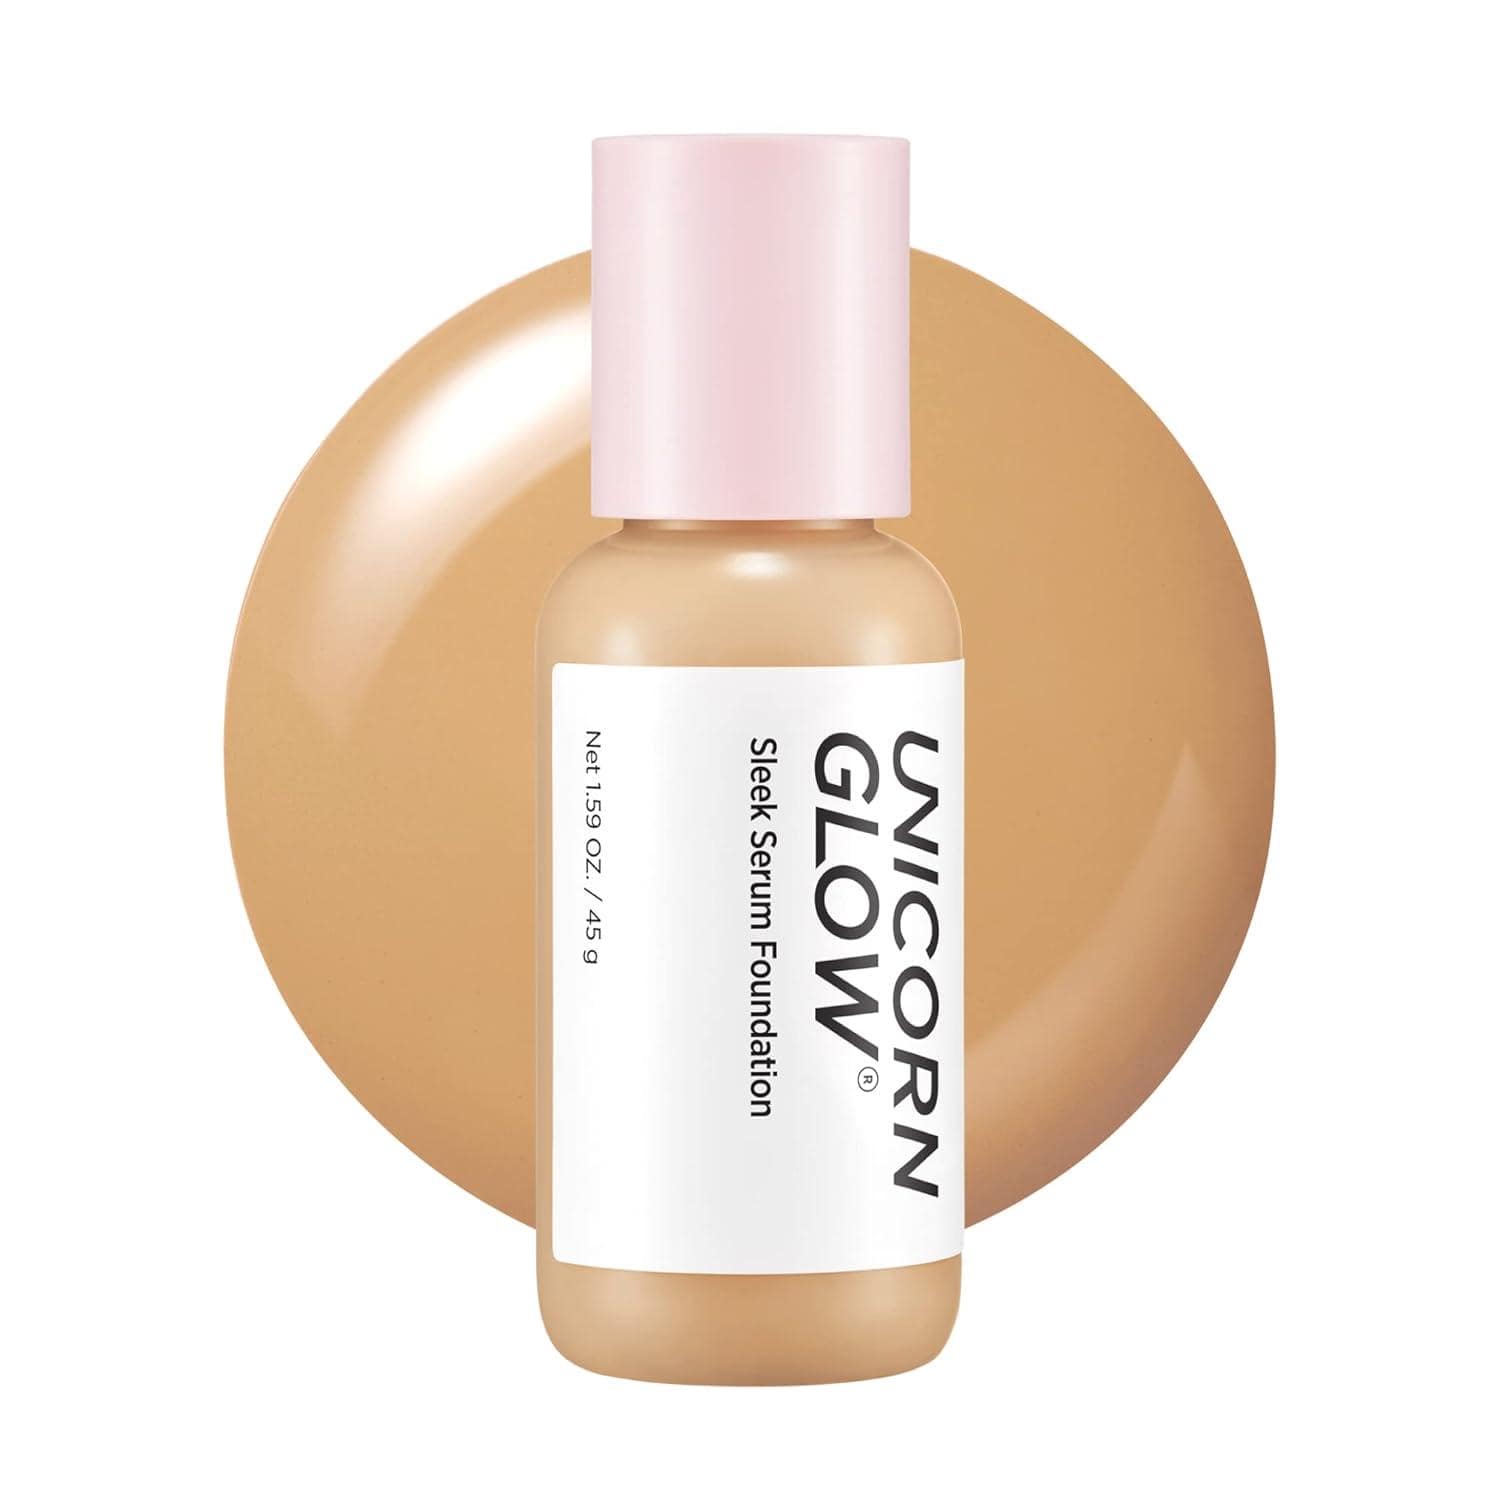 Loving Unicorn Glow's Sleek Serum Foundation-a budget-friendly gem at under , ideal for no-makeup makeup days. Its breathable, hyaluronic acid-enriched formula delivers a dewy finish, making pores vanish for a subtle tint without the cakiness.